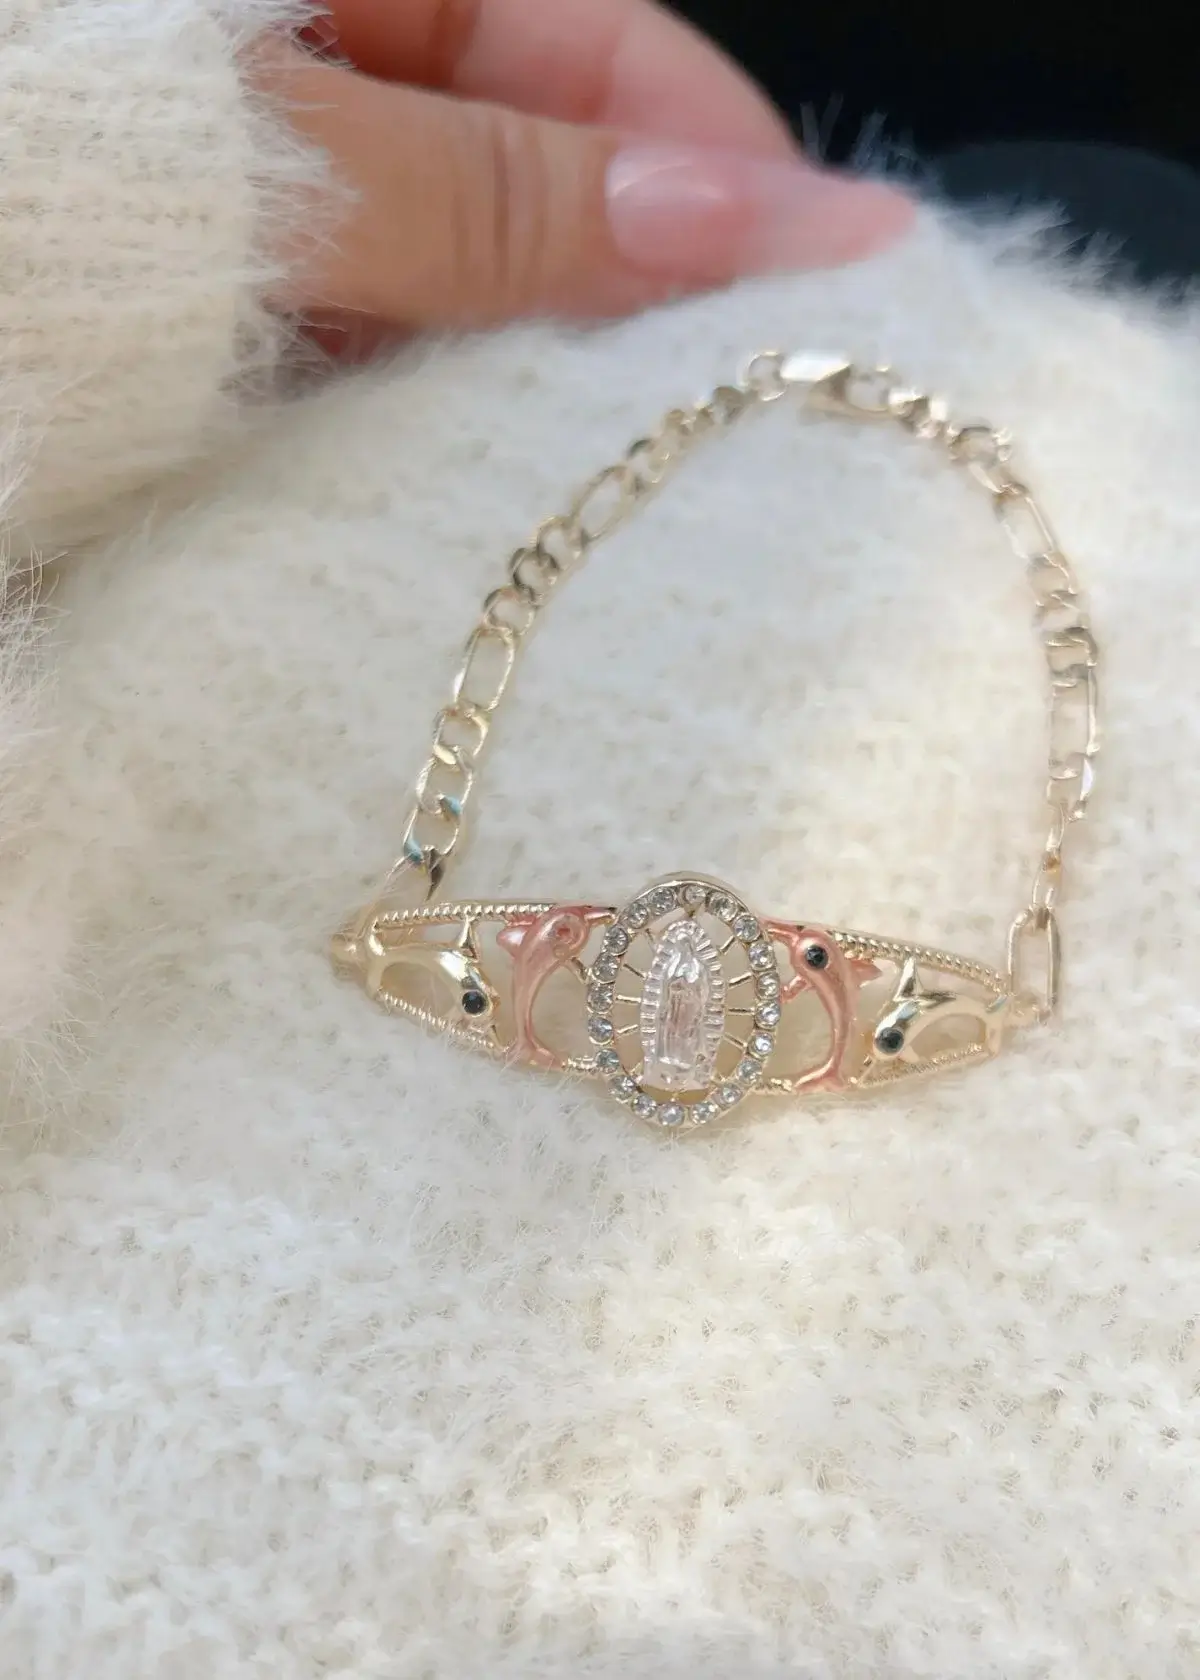 How can I Style an Esclava Bracelet with my Outfit?